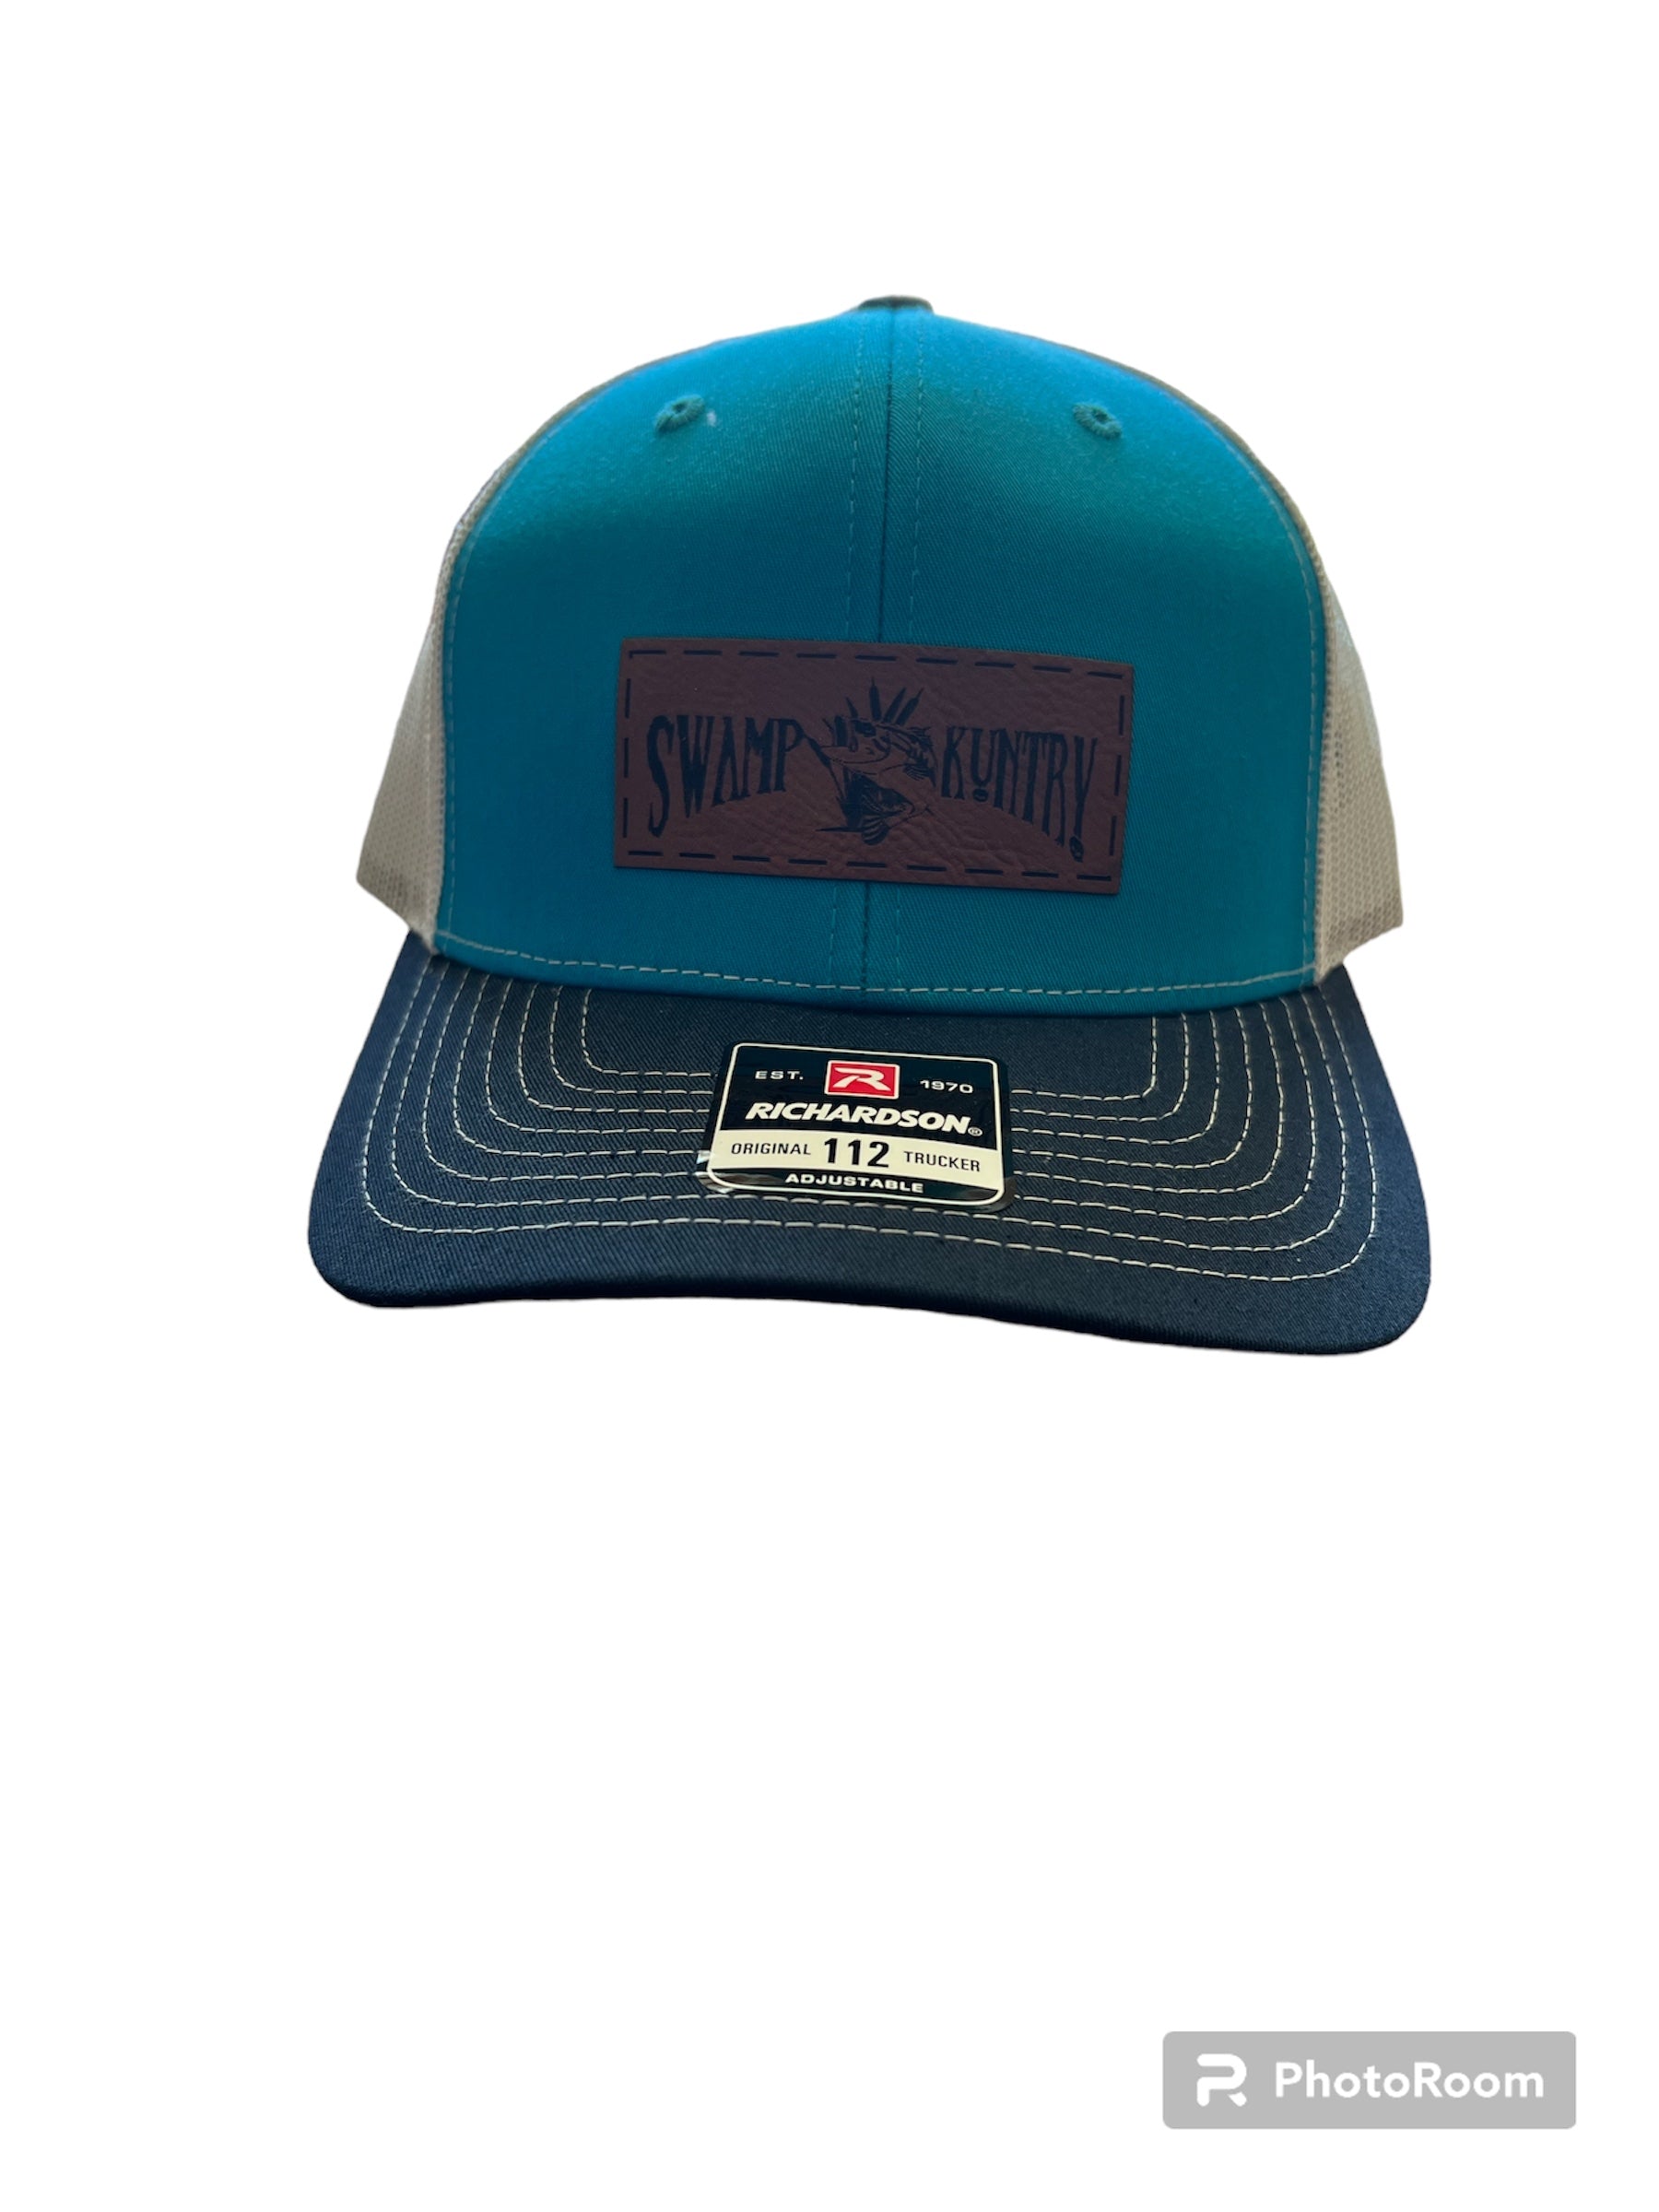 Swamp Kuntry Outfitters Fishing Logo Hat